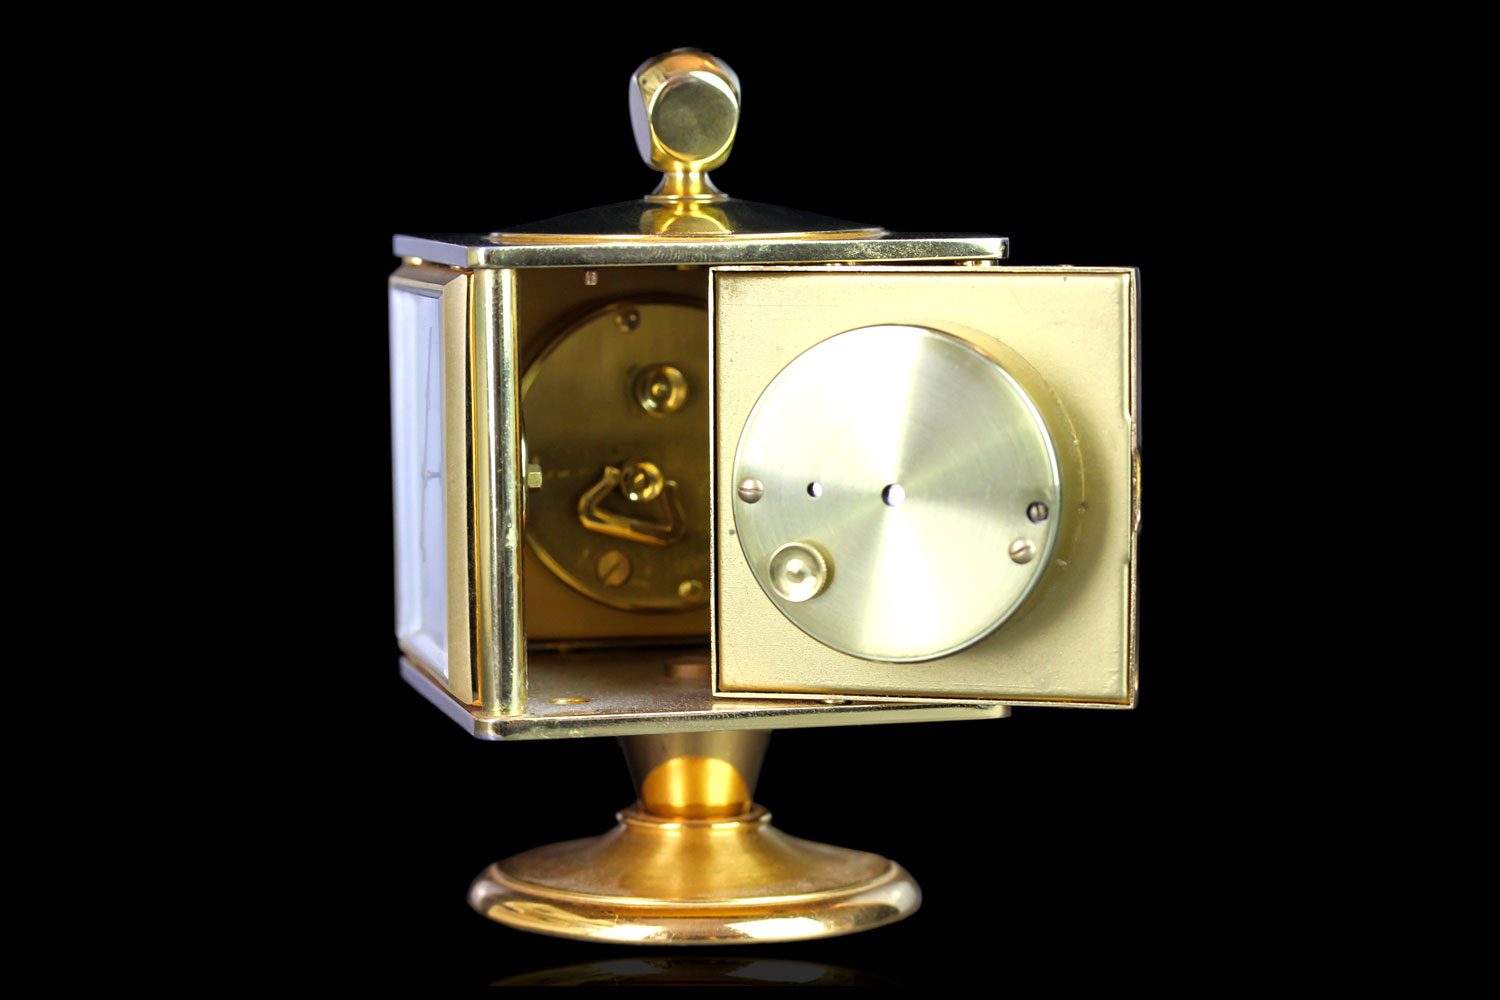 IMHOF Swiss desk clock, four sides with Time, Hygrometer, Barometer and Thermometer, gilt case - Image 5 of 7